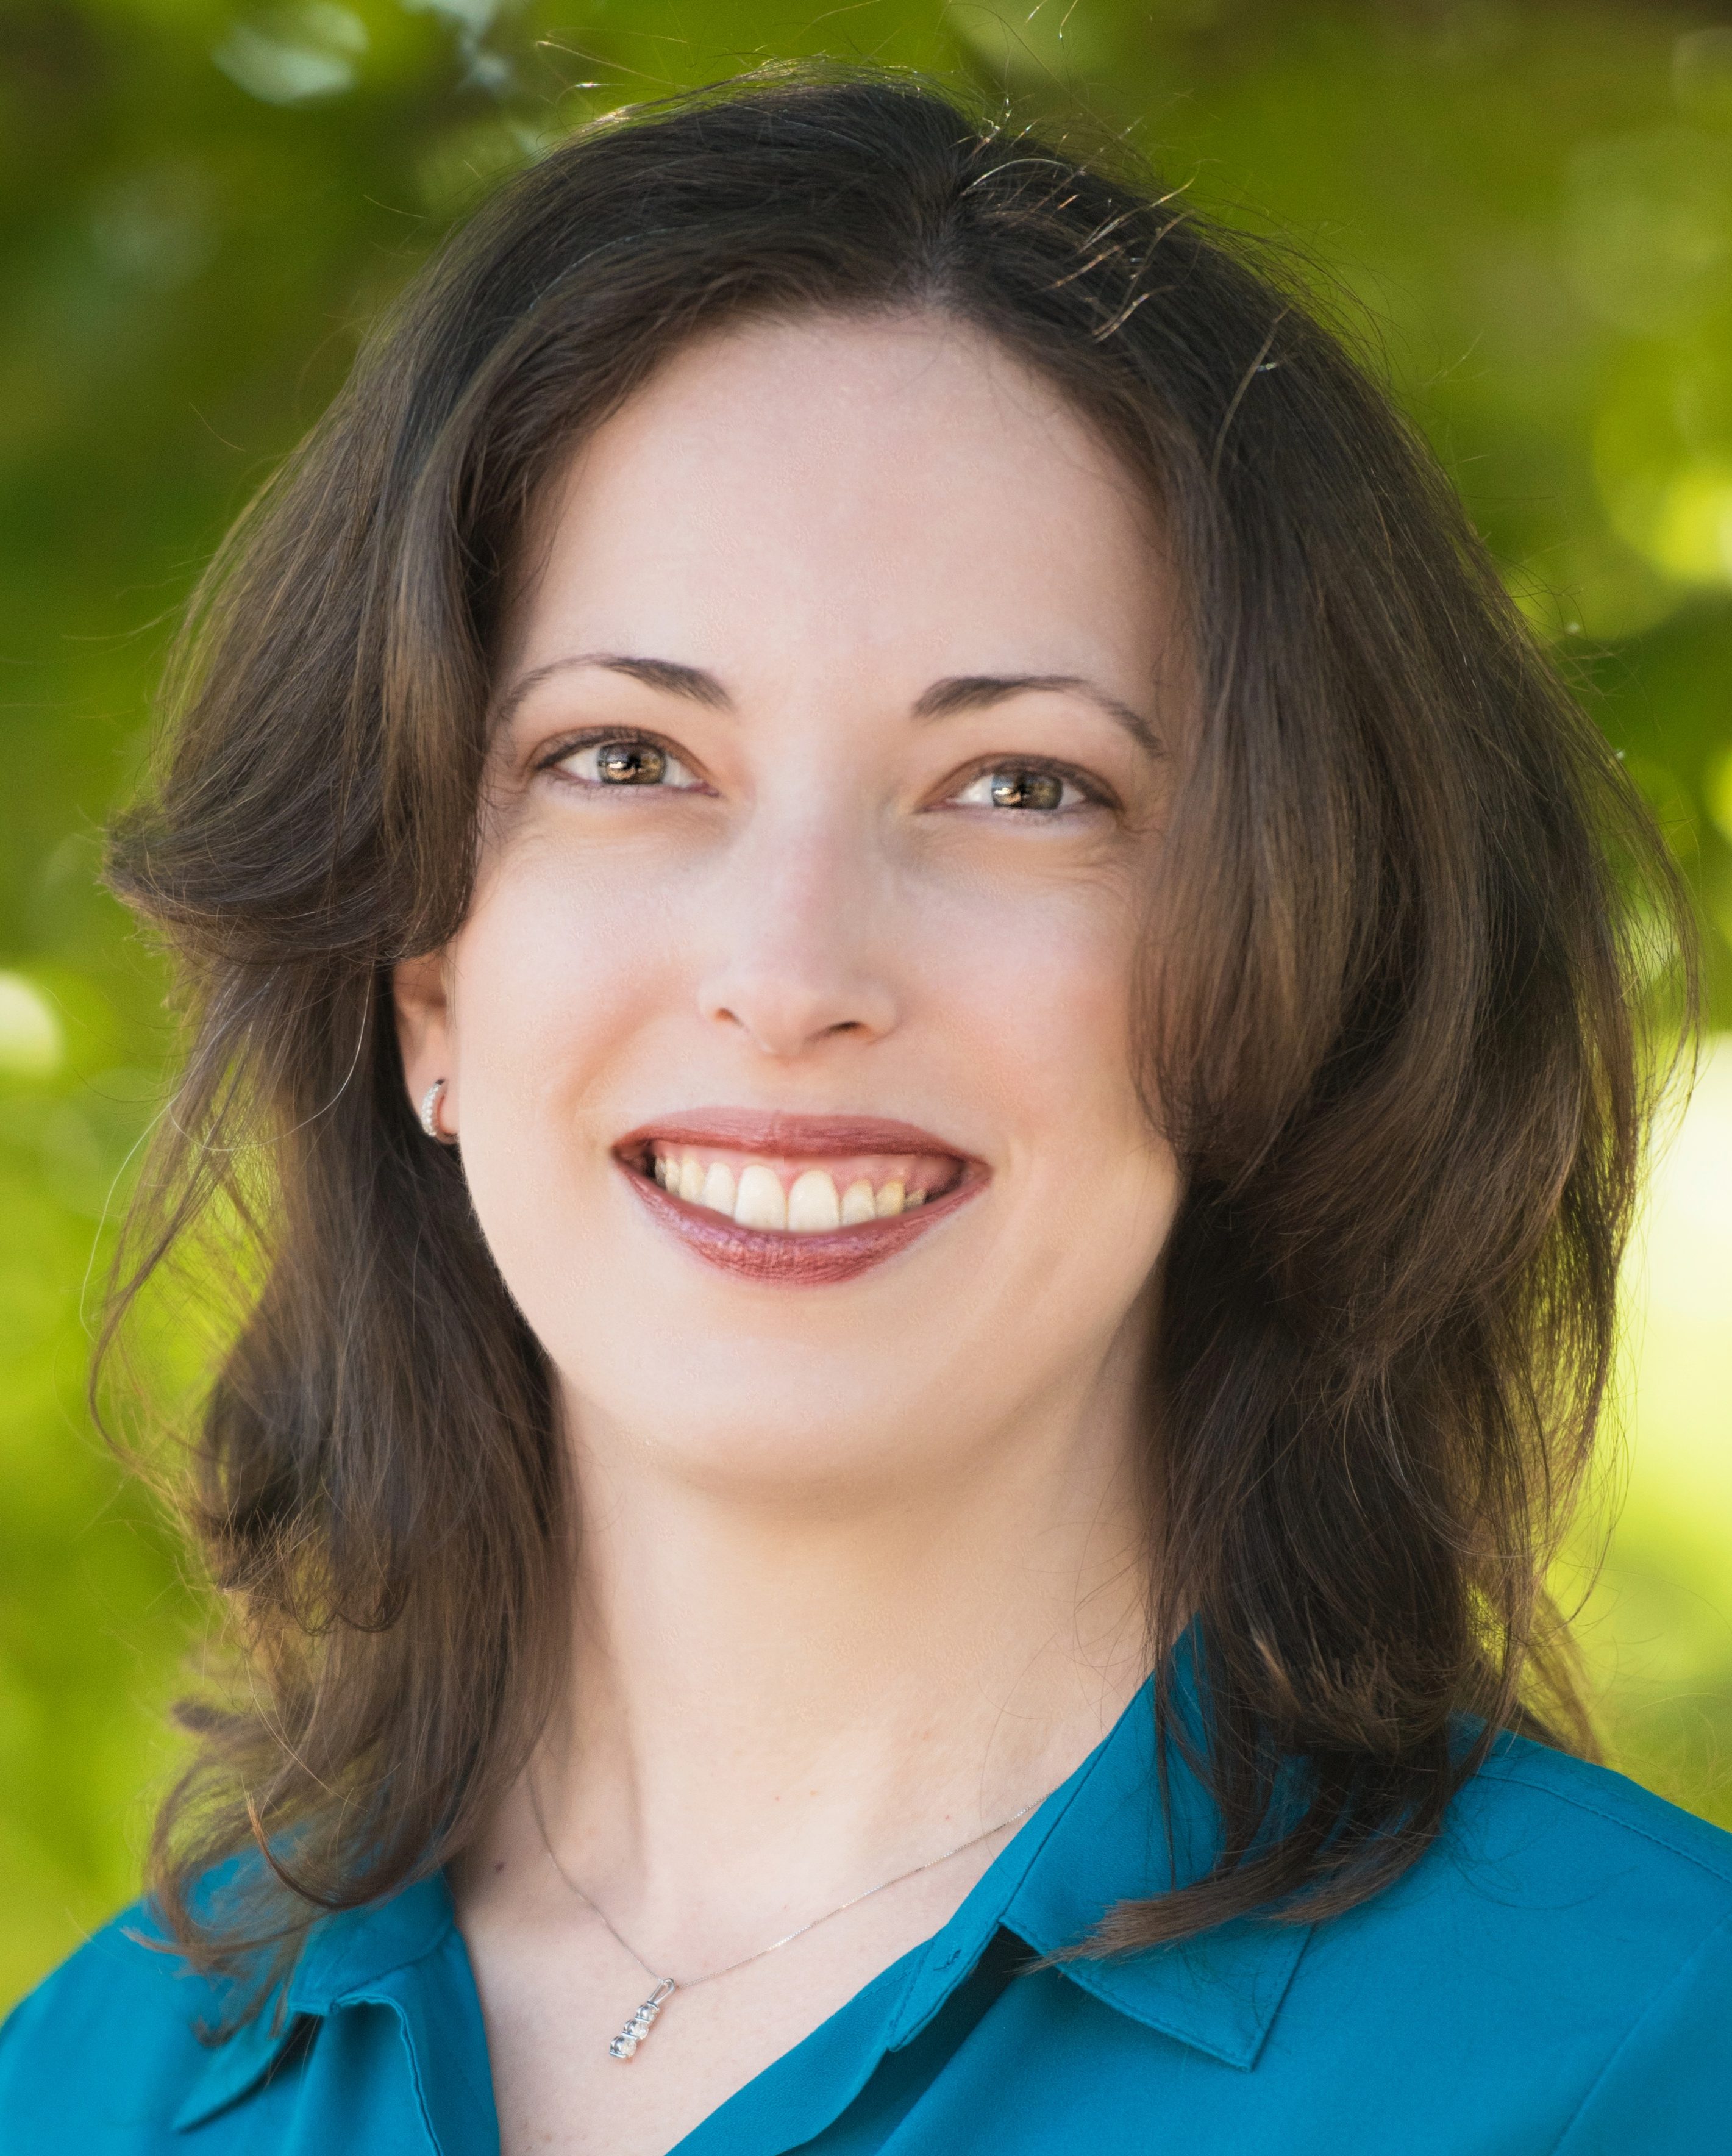 Photograph of Dr. Jennifer Hill. Dr. Hill is a white female with brown hair. In the photo she is wearing a blue shirt and smiling at the camera.